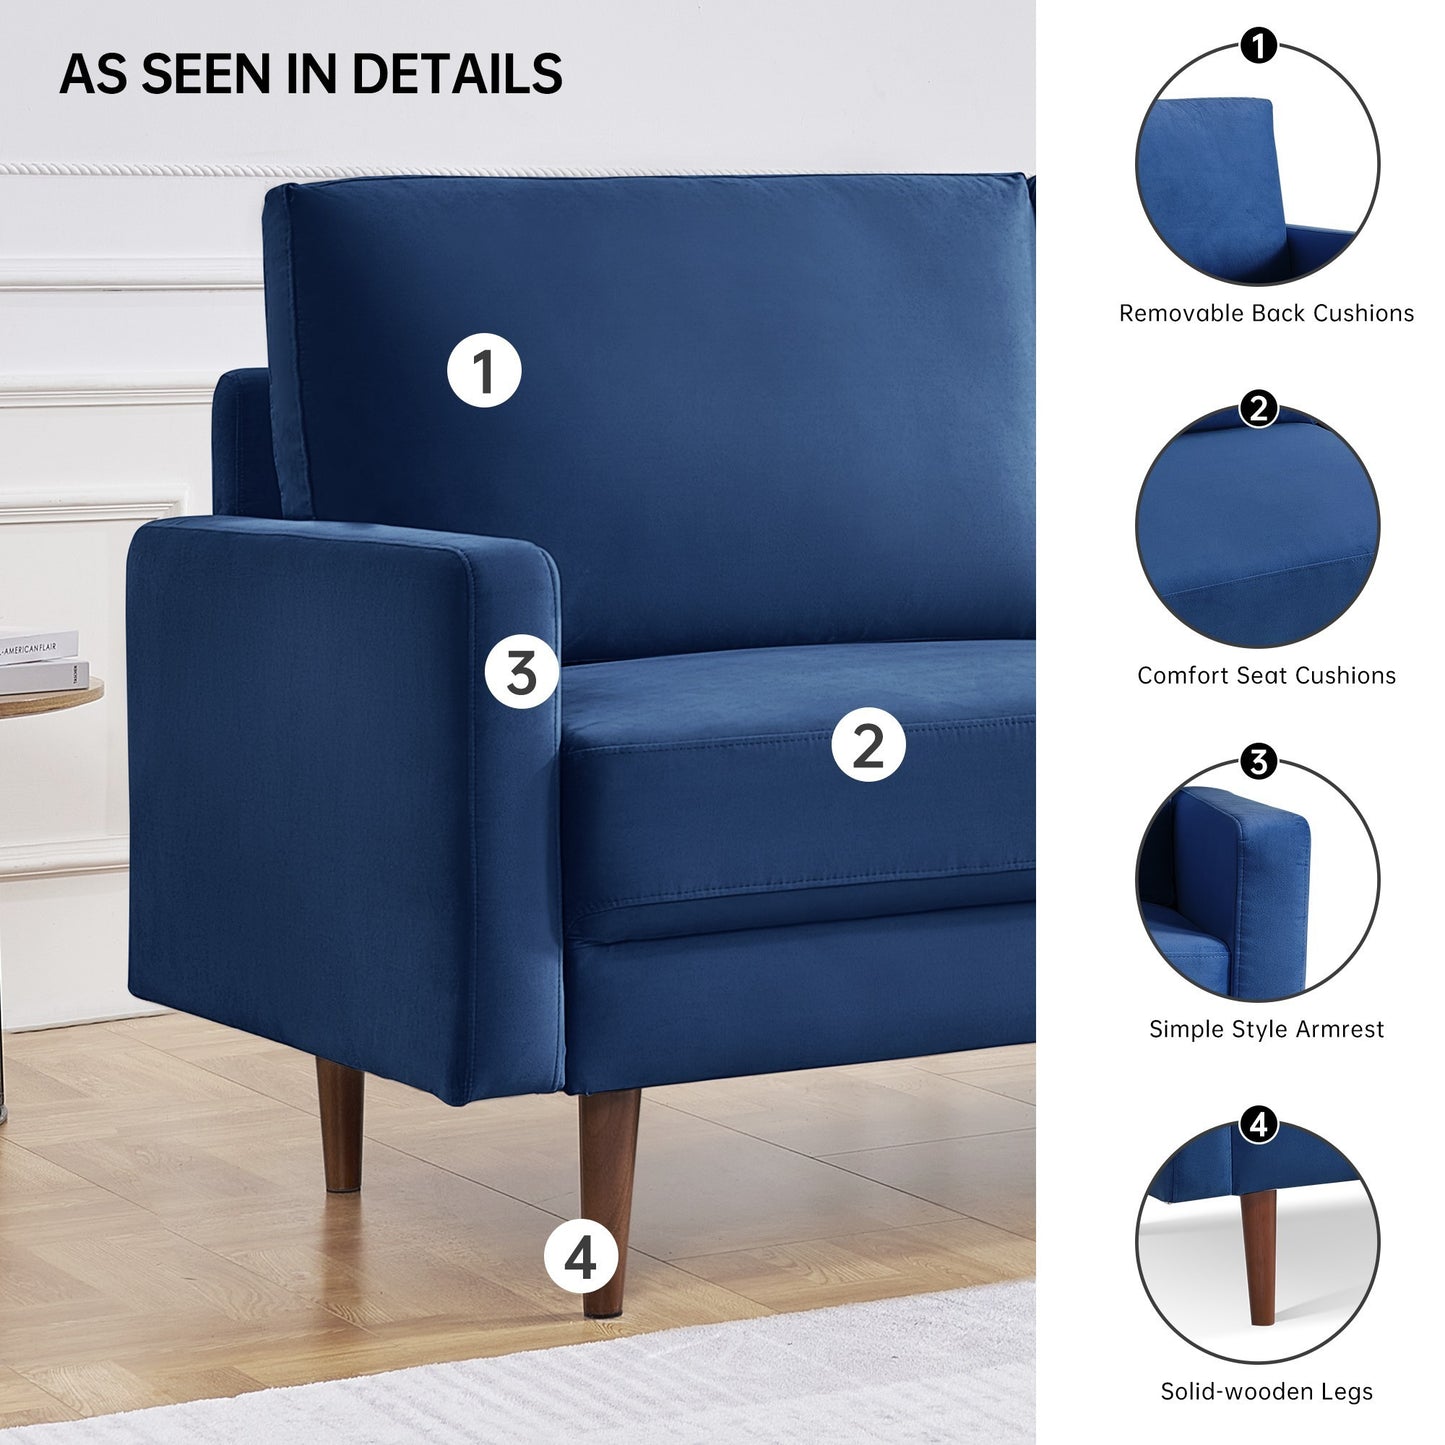 57.1" Modern Decor Upholstered Sofa Furniture, Wide Velvet Fabric Loveseat Couch, Solid Wooden Frame with Padded Cushion - Blue